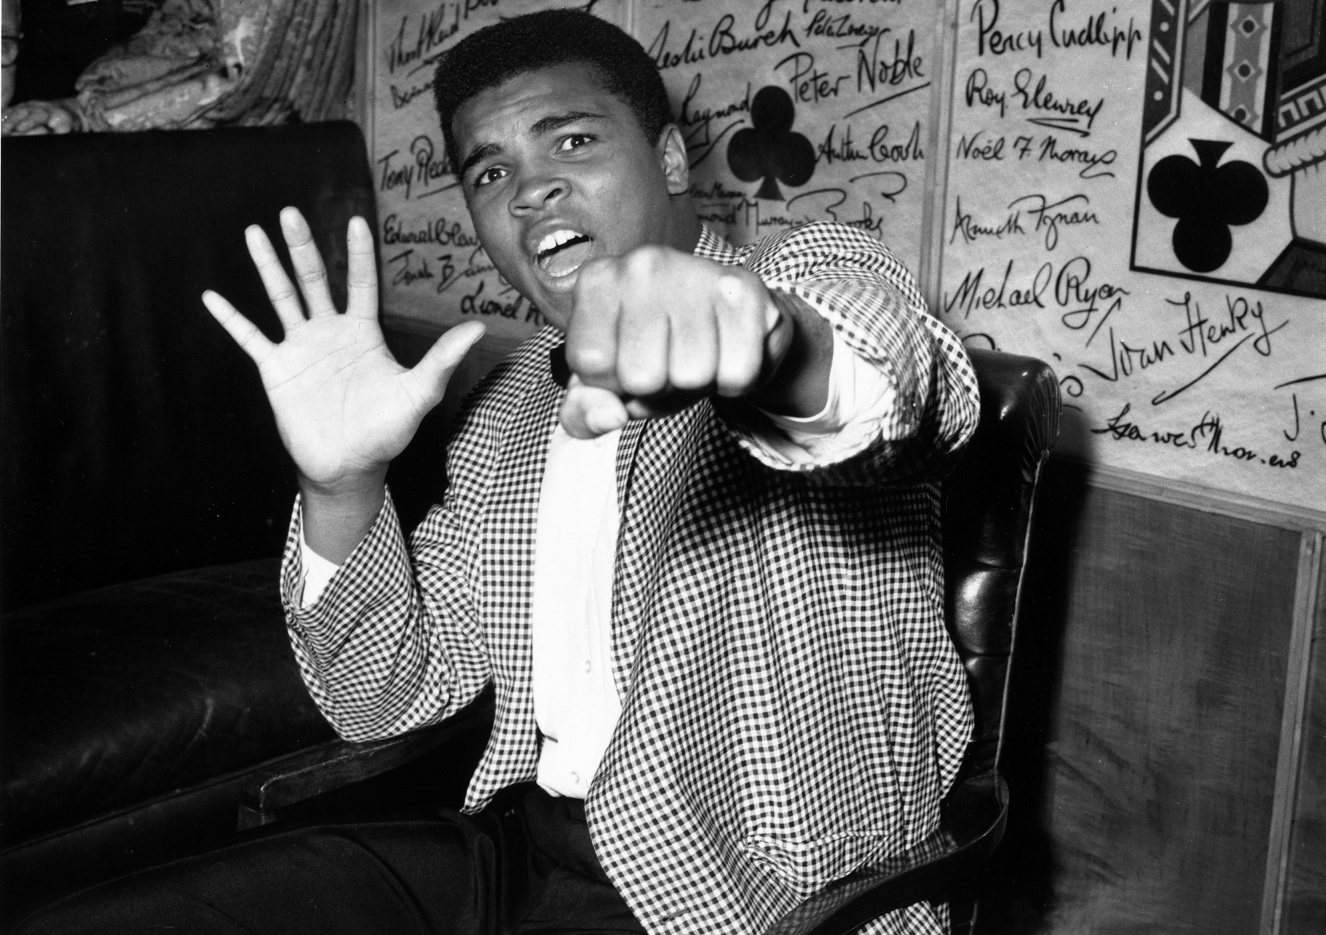 Muhammad Ali | How the world mourned and paid tribute to 'The Greatest'